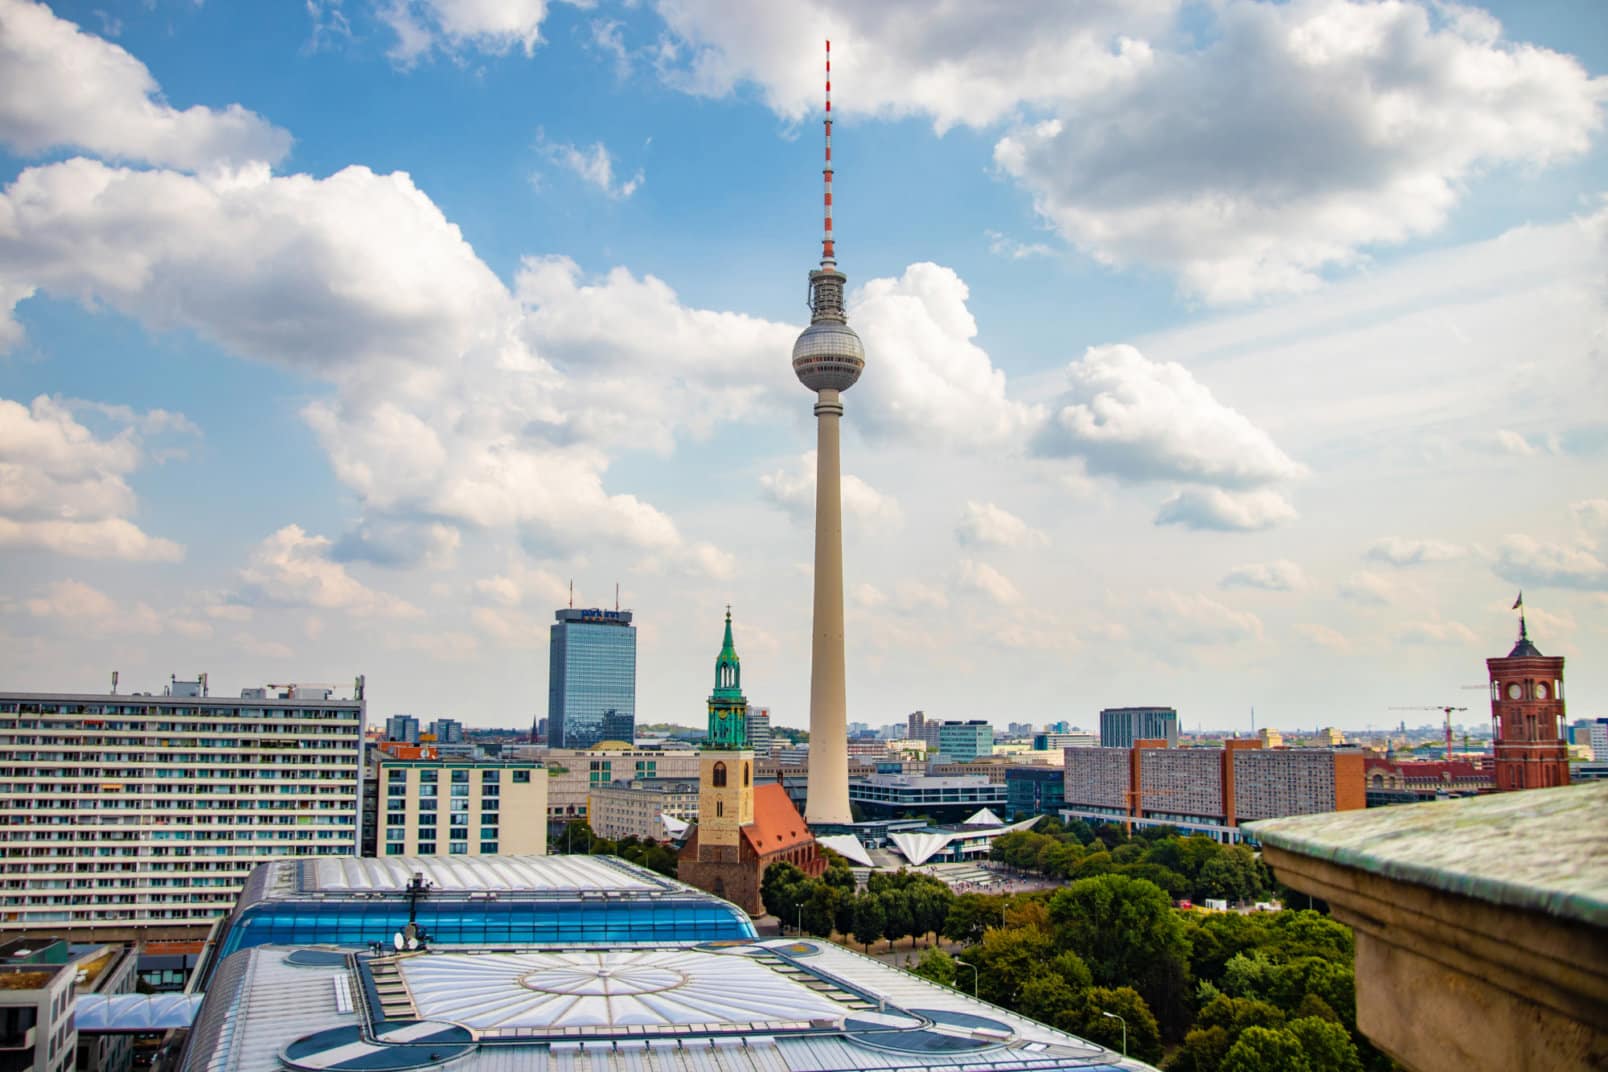 View of the television tower in Berlin and other buildings in the surrounding area